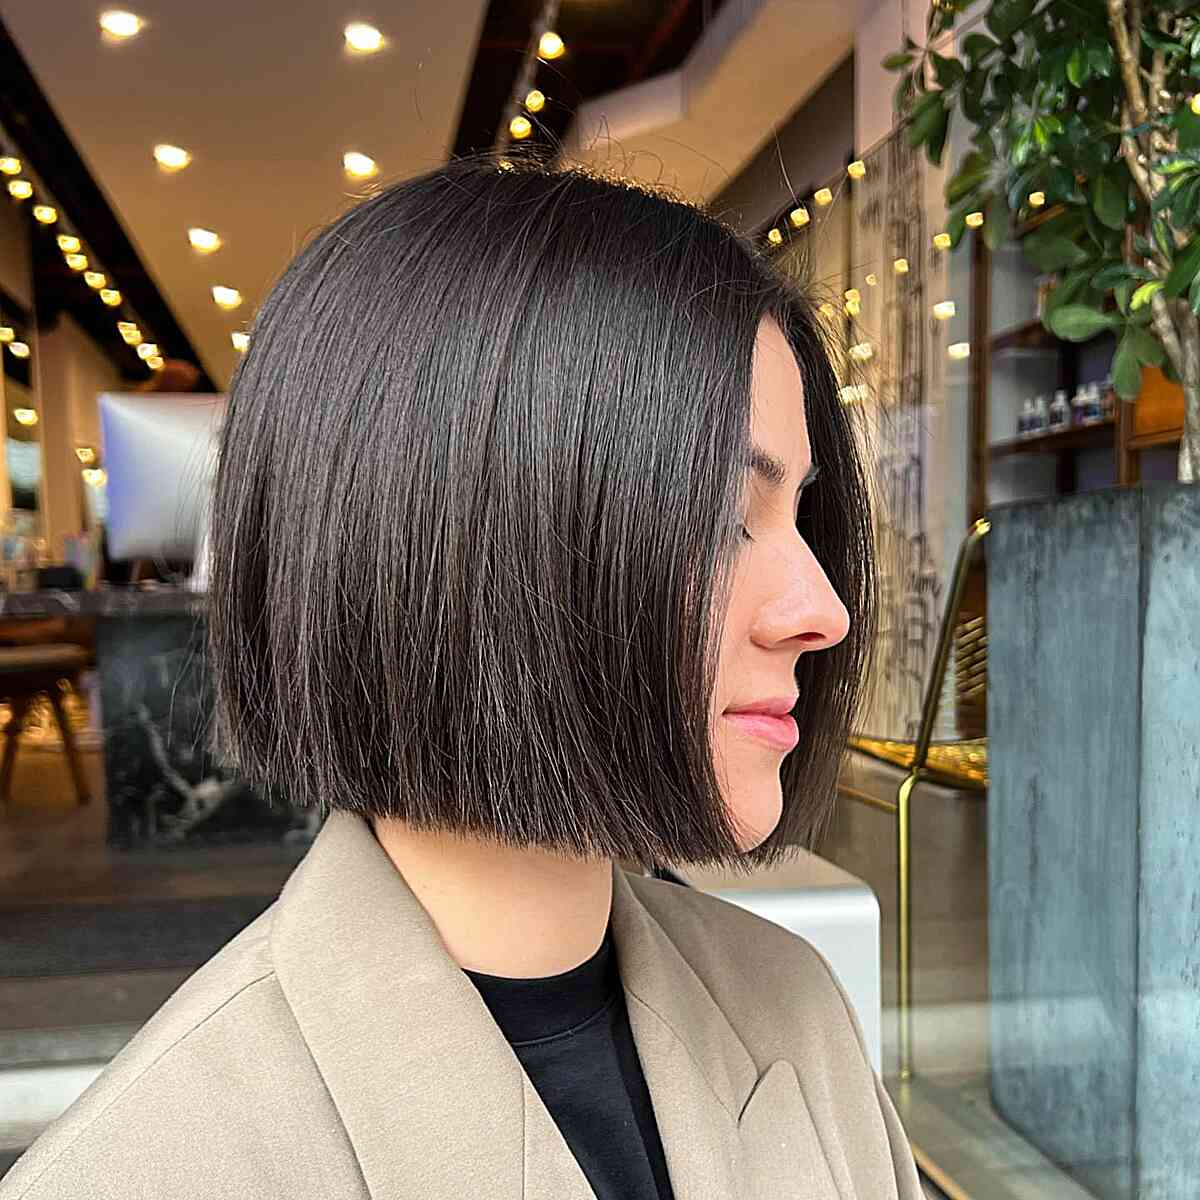 Short One-Length Slob Cut with Straight Ends for Girls' Dark Hair